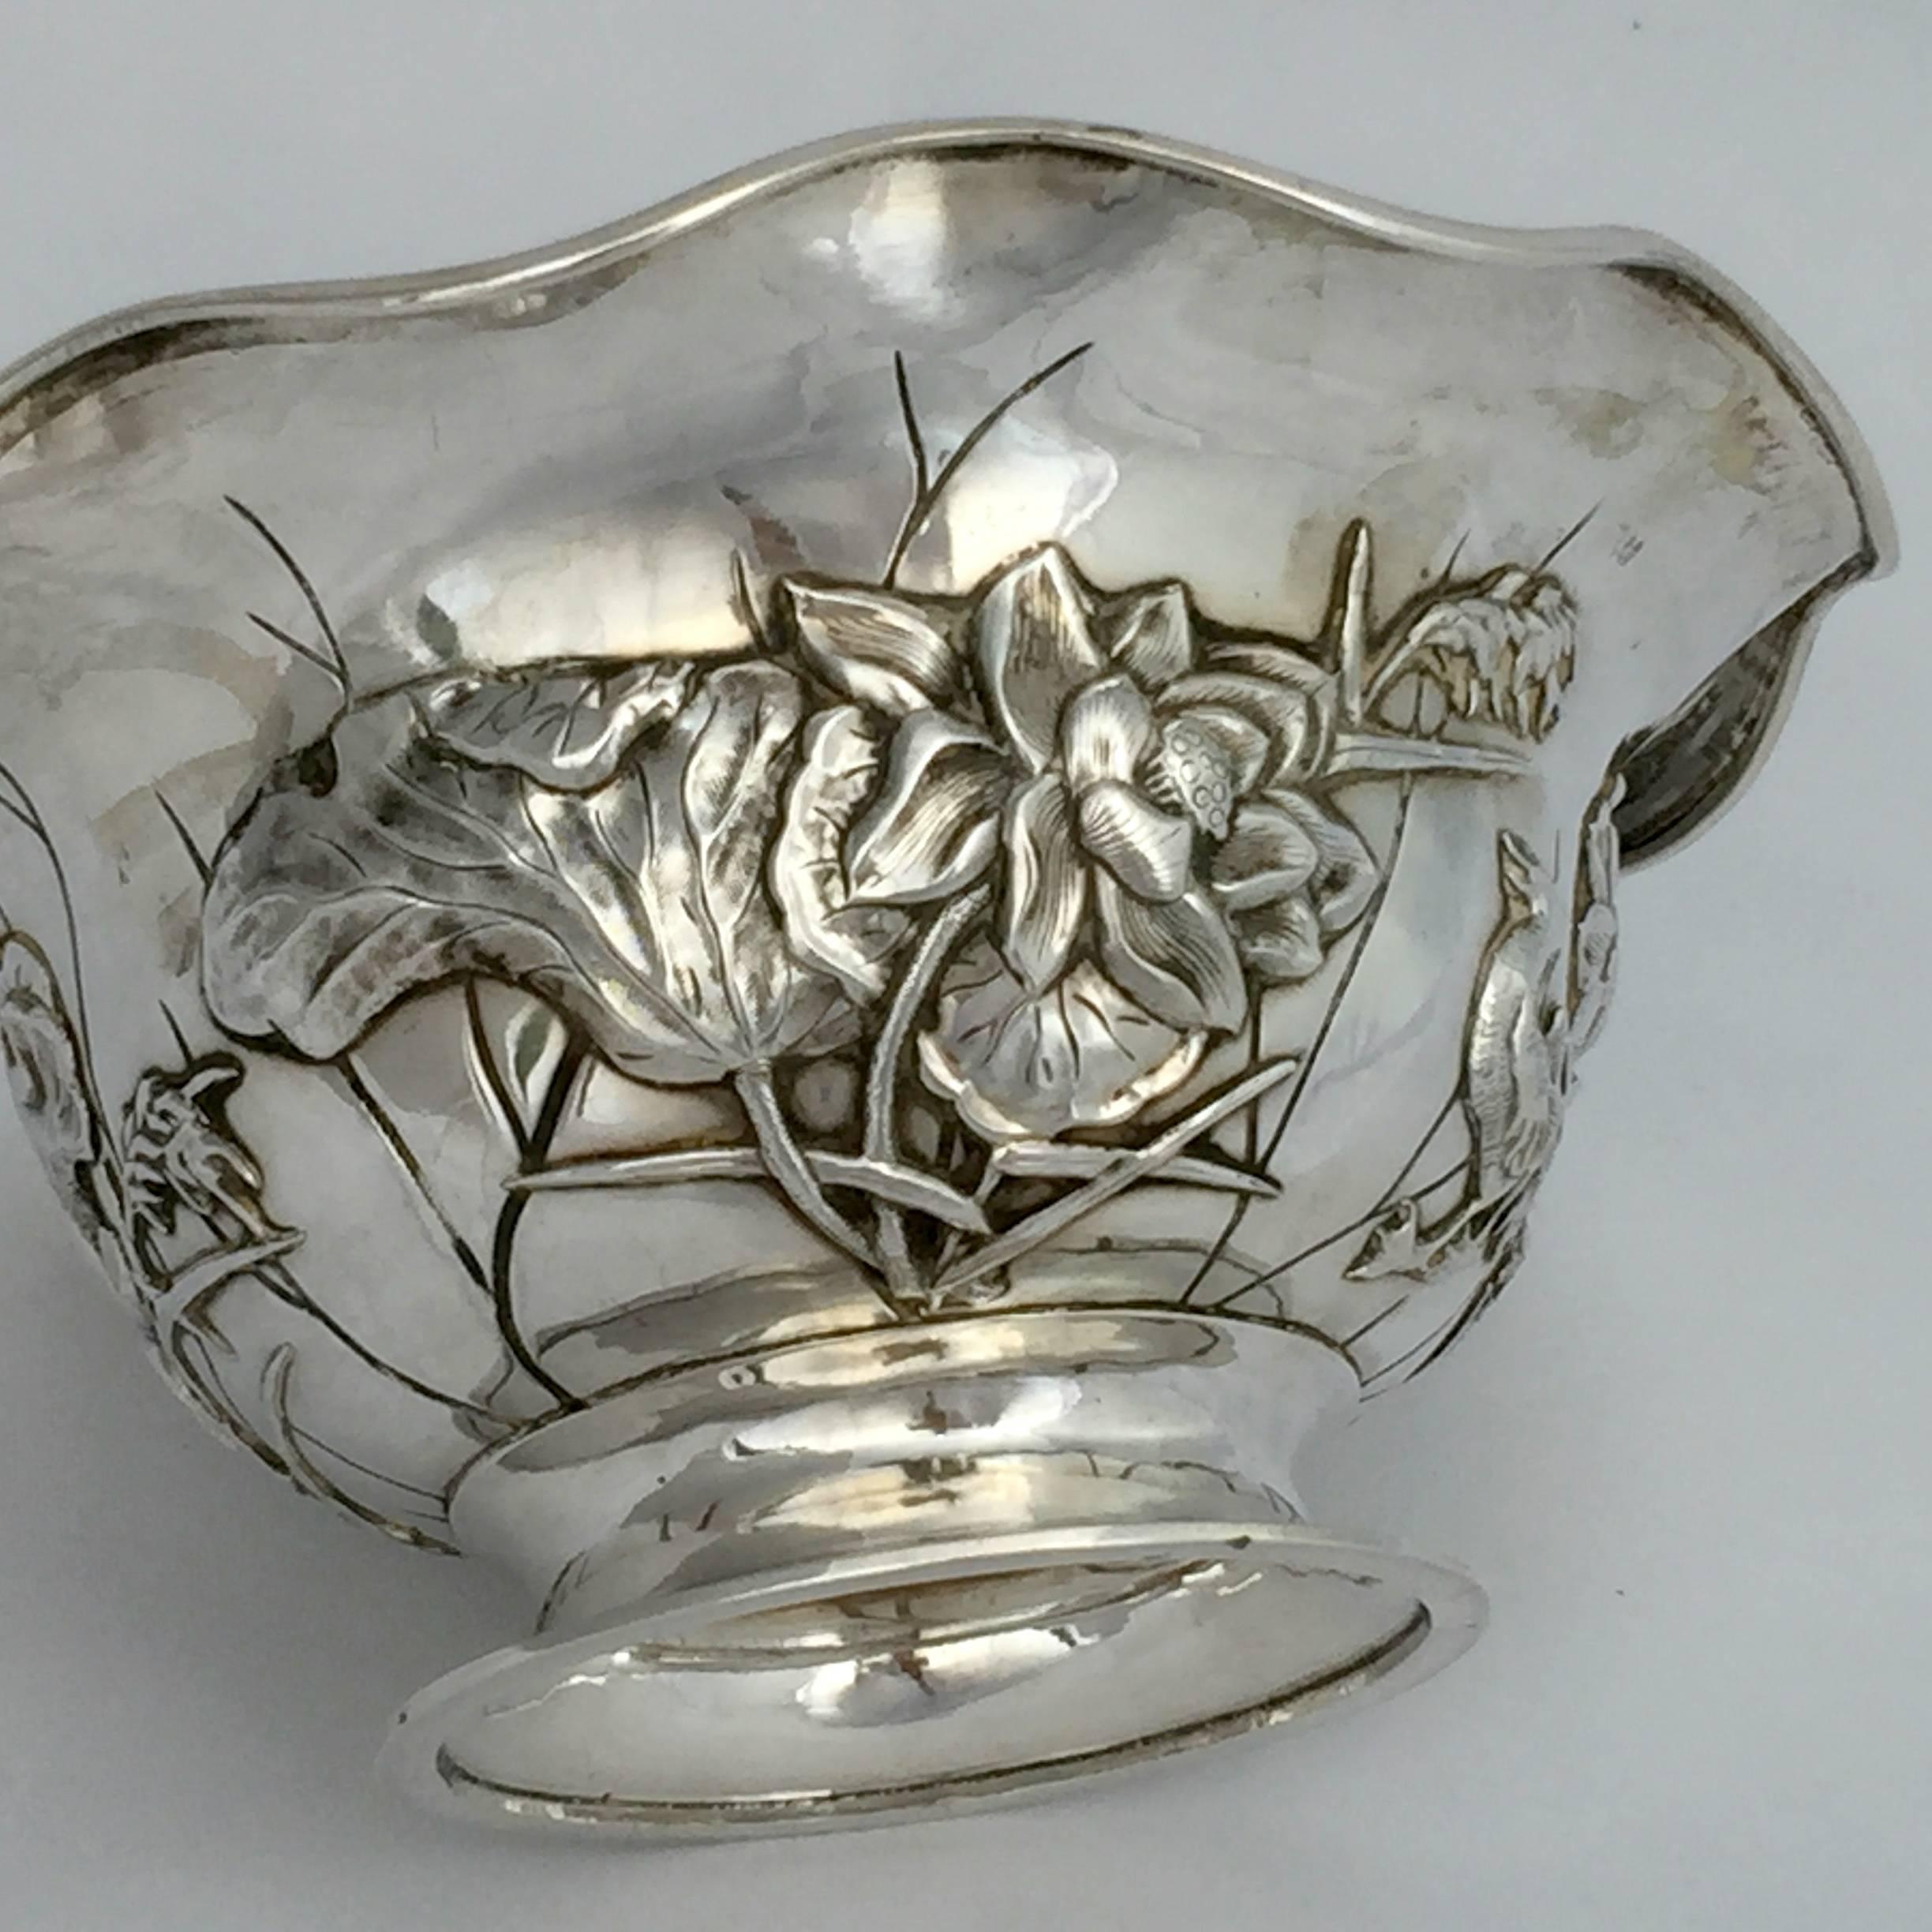 Chinese Export Silver Bowl by Luen Wo with Lotus Detail 1